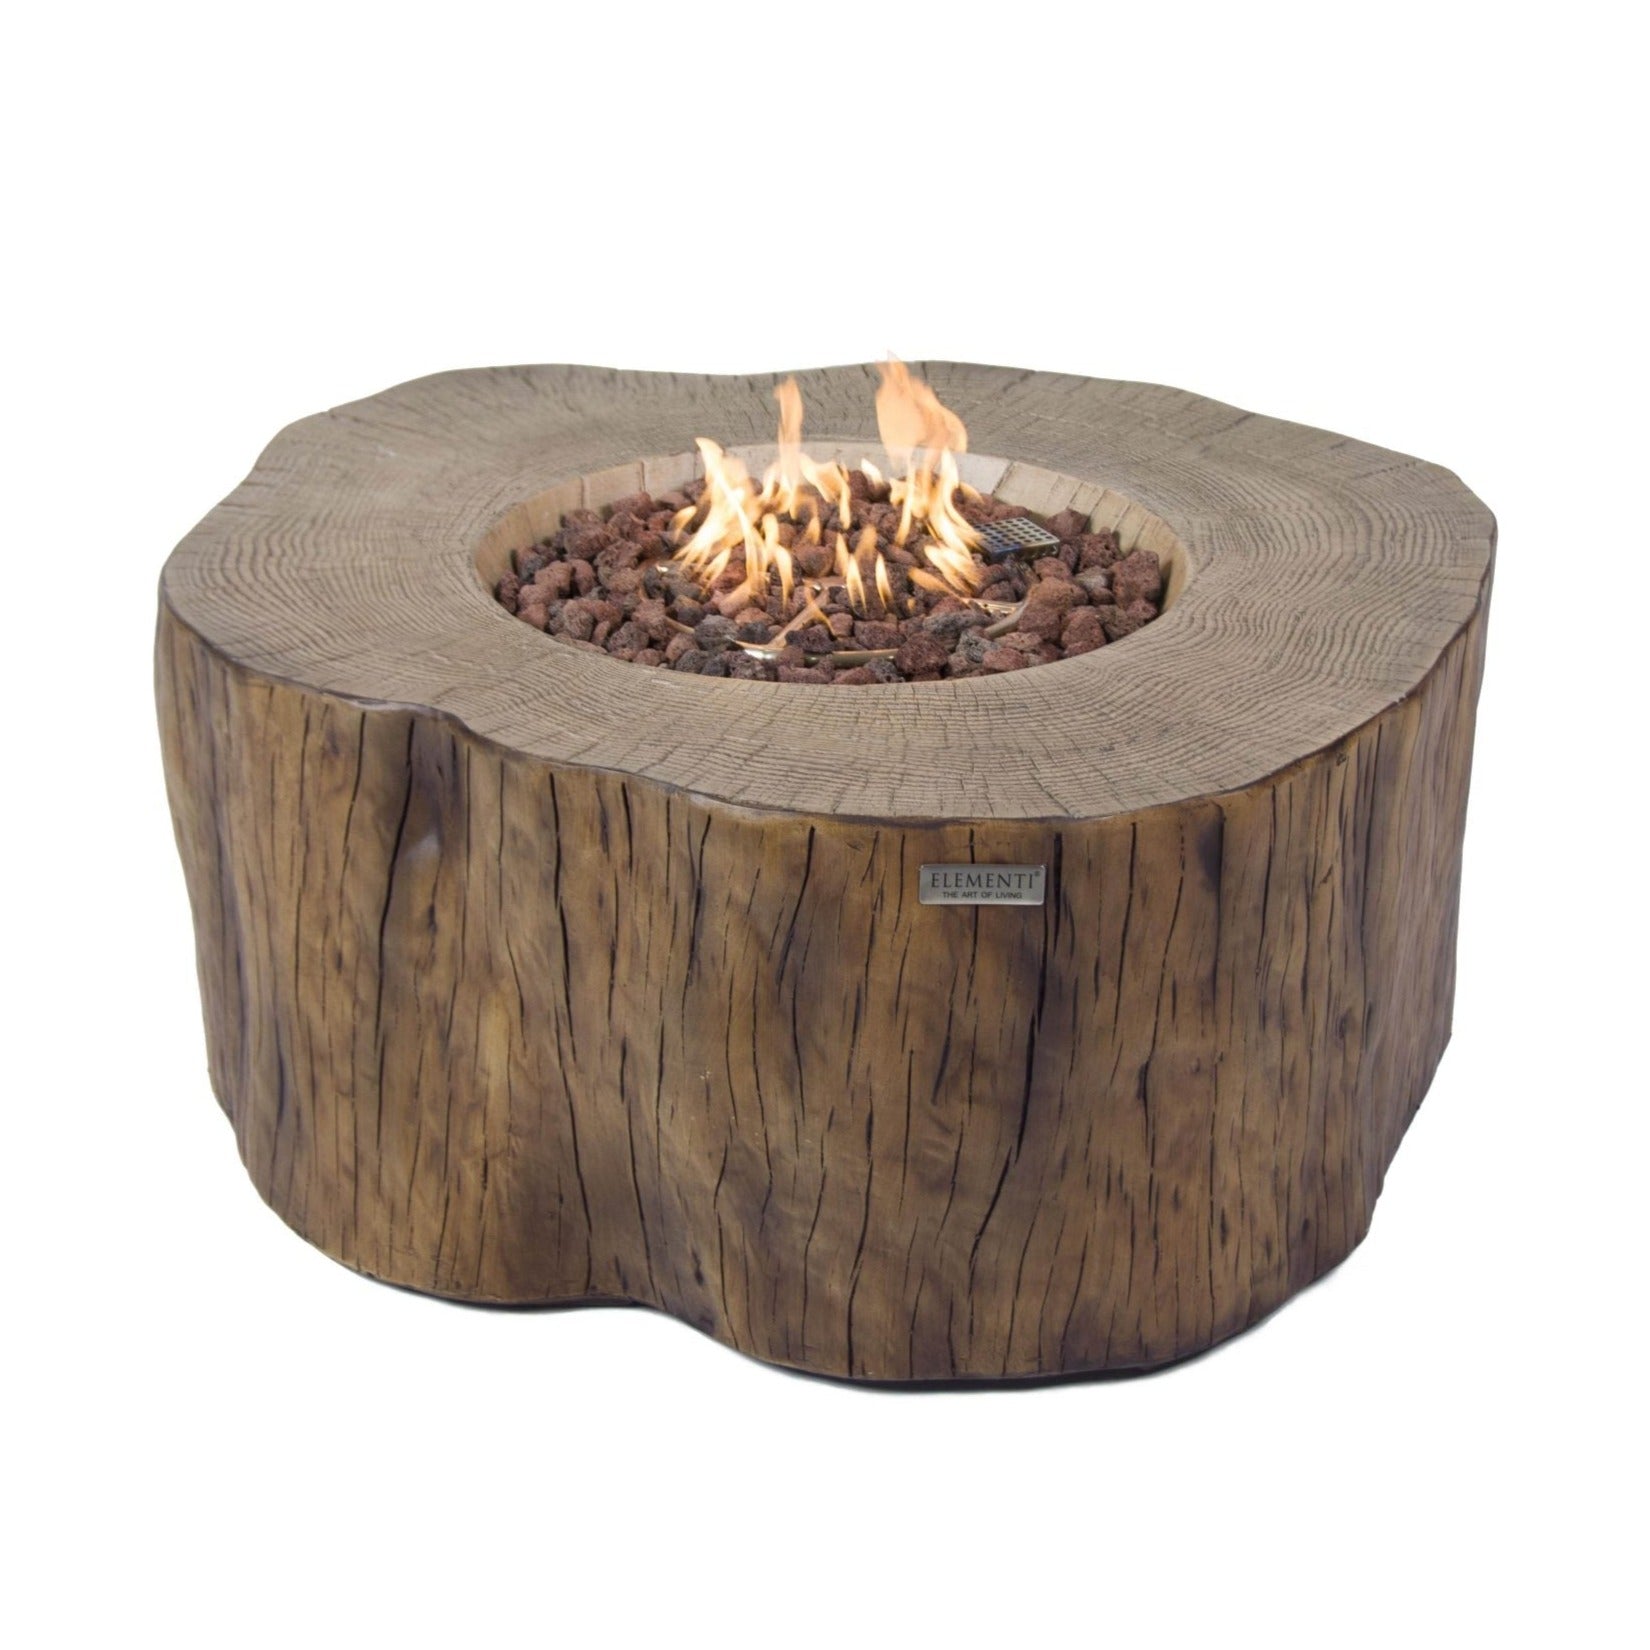 Elementi Manchester Fire Pit Table in Red Wood lit